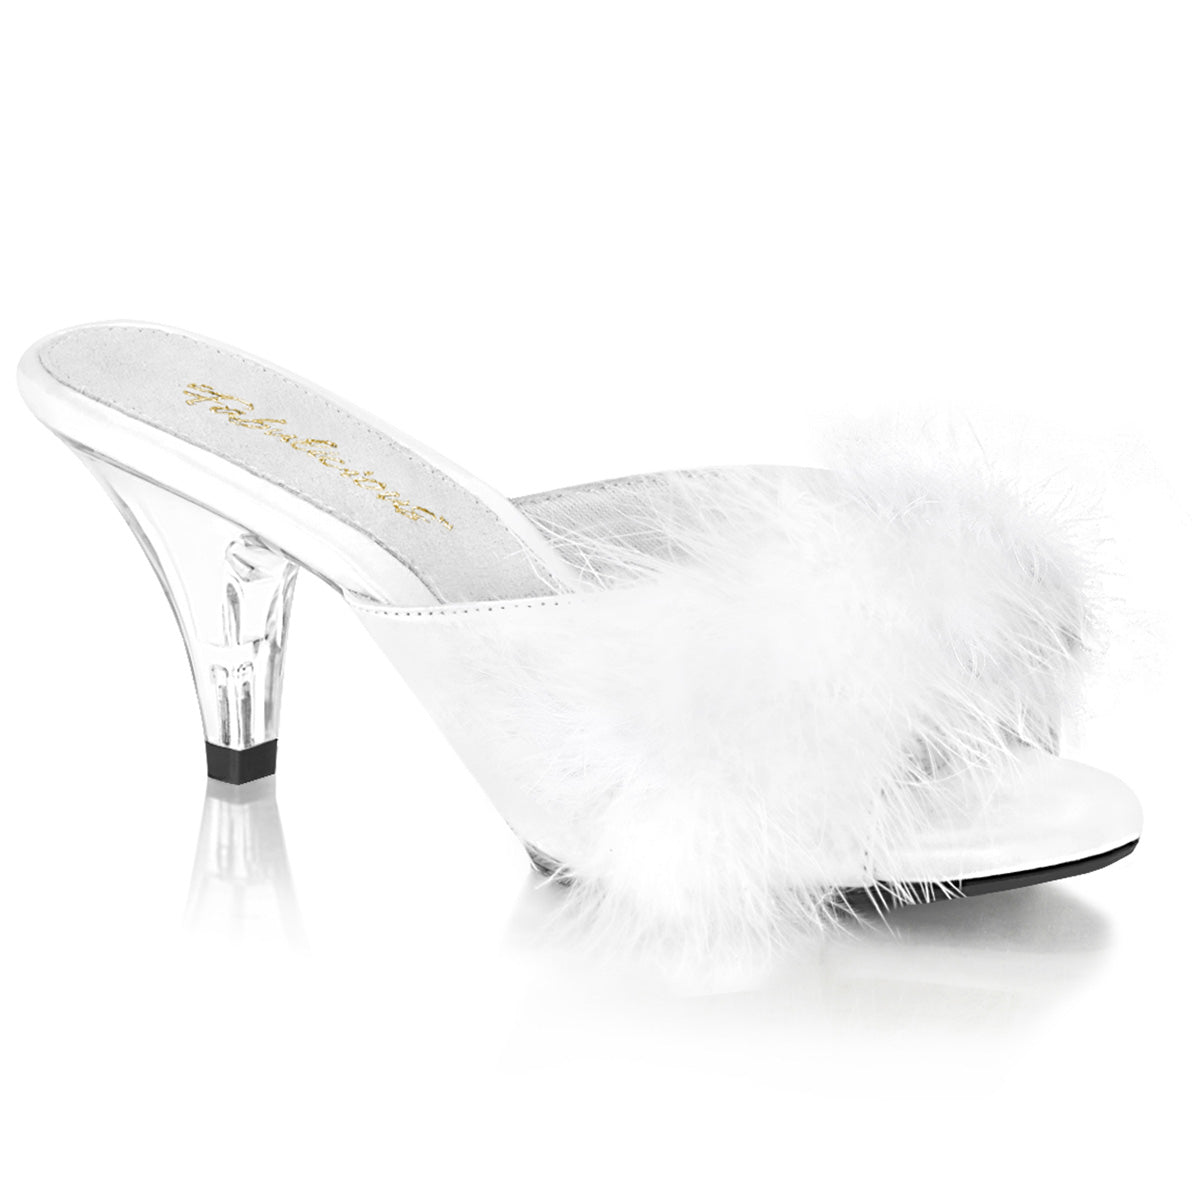 BELLE-301F Fabulicious 3 Inch Heel White Faux Fur Sexy Shoes